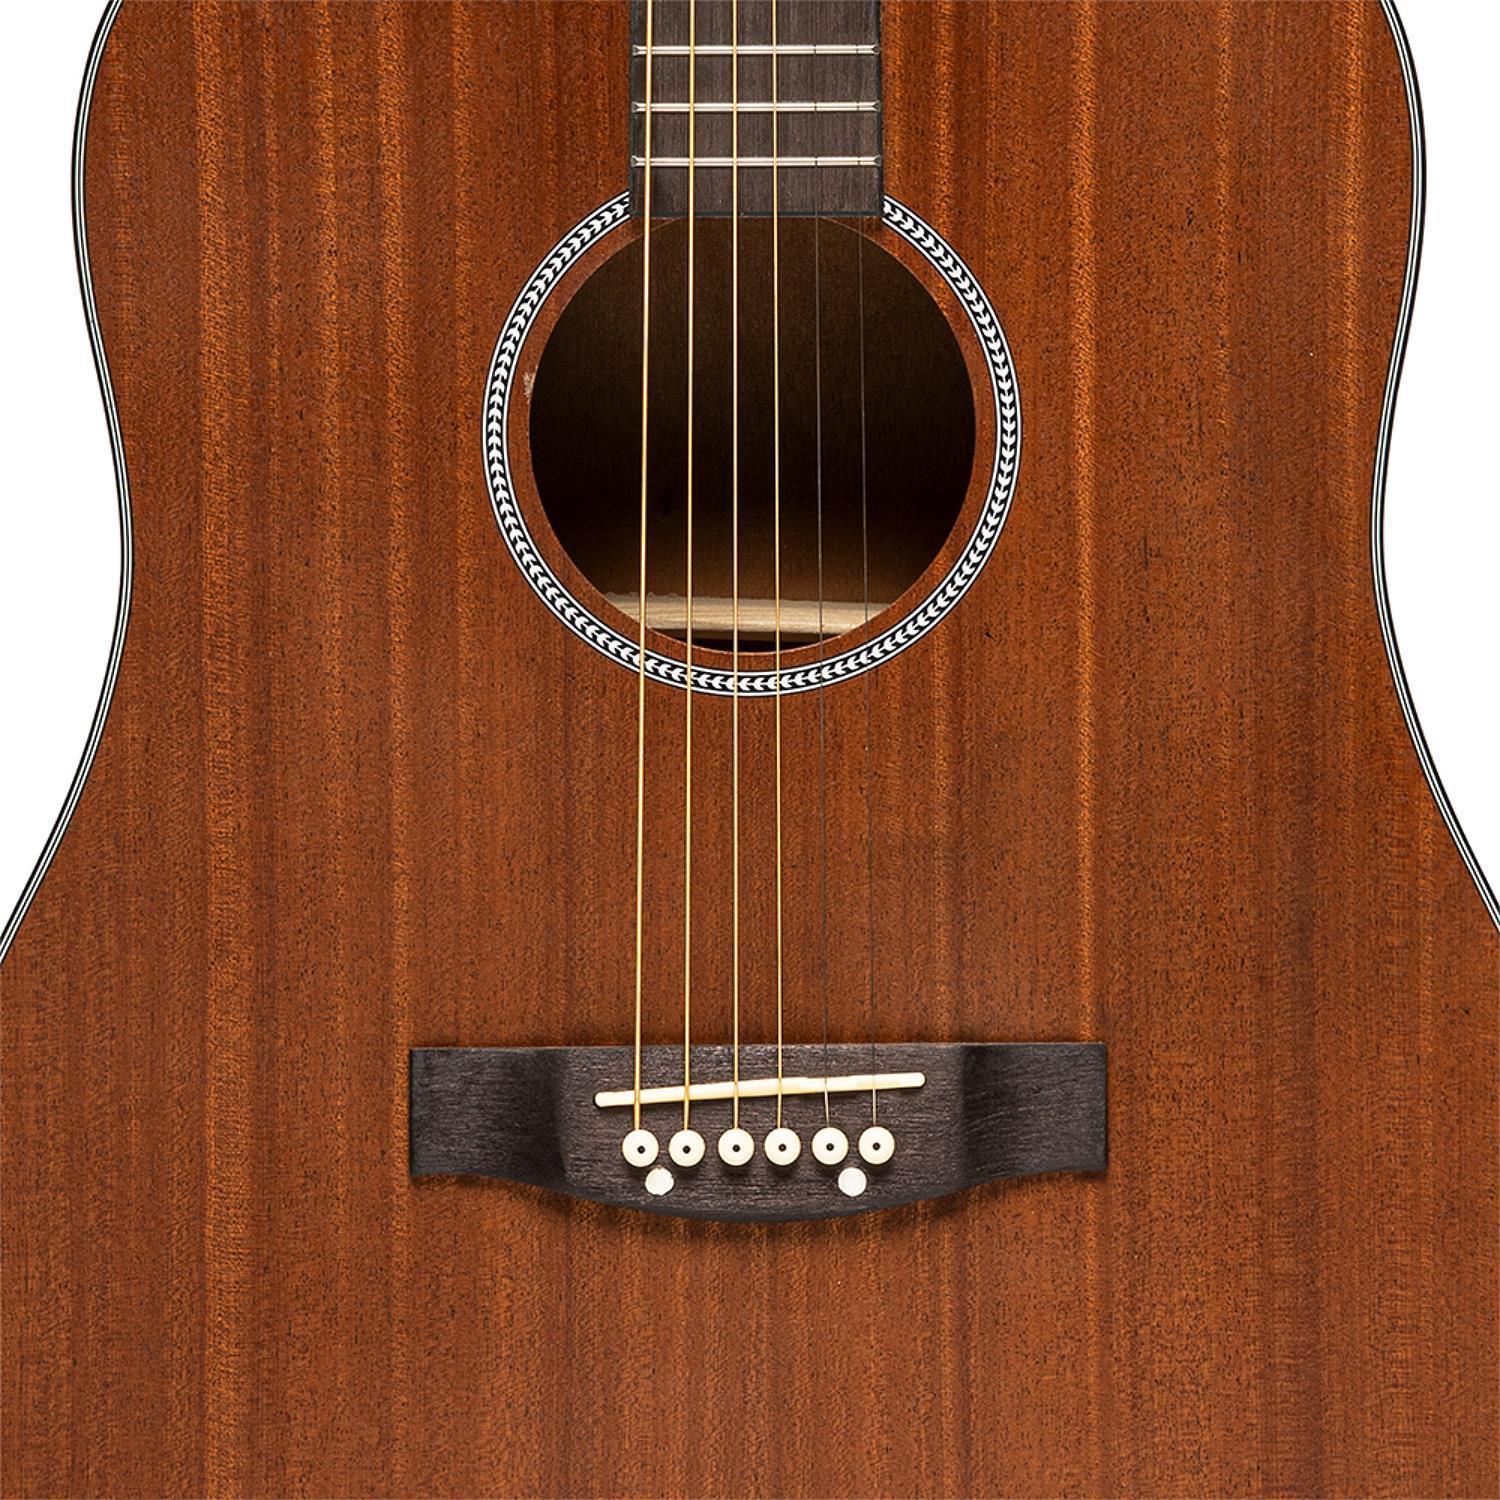 Stagg SA25 D MAHO Acoustic Dreadnought Guitar - DY Pro Audio